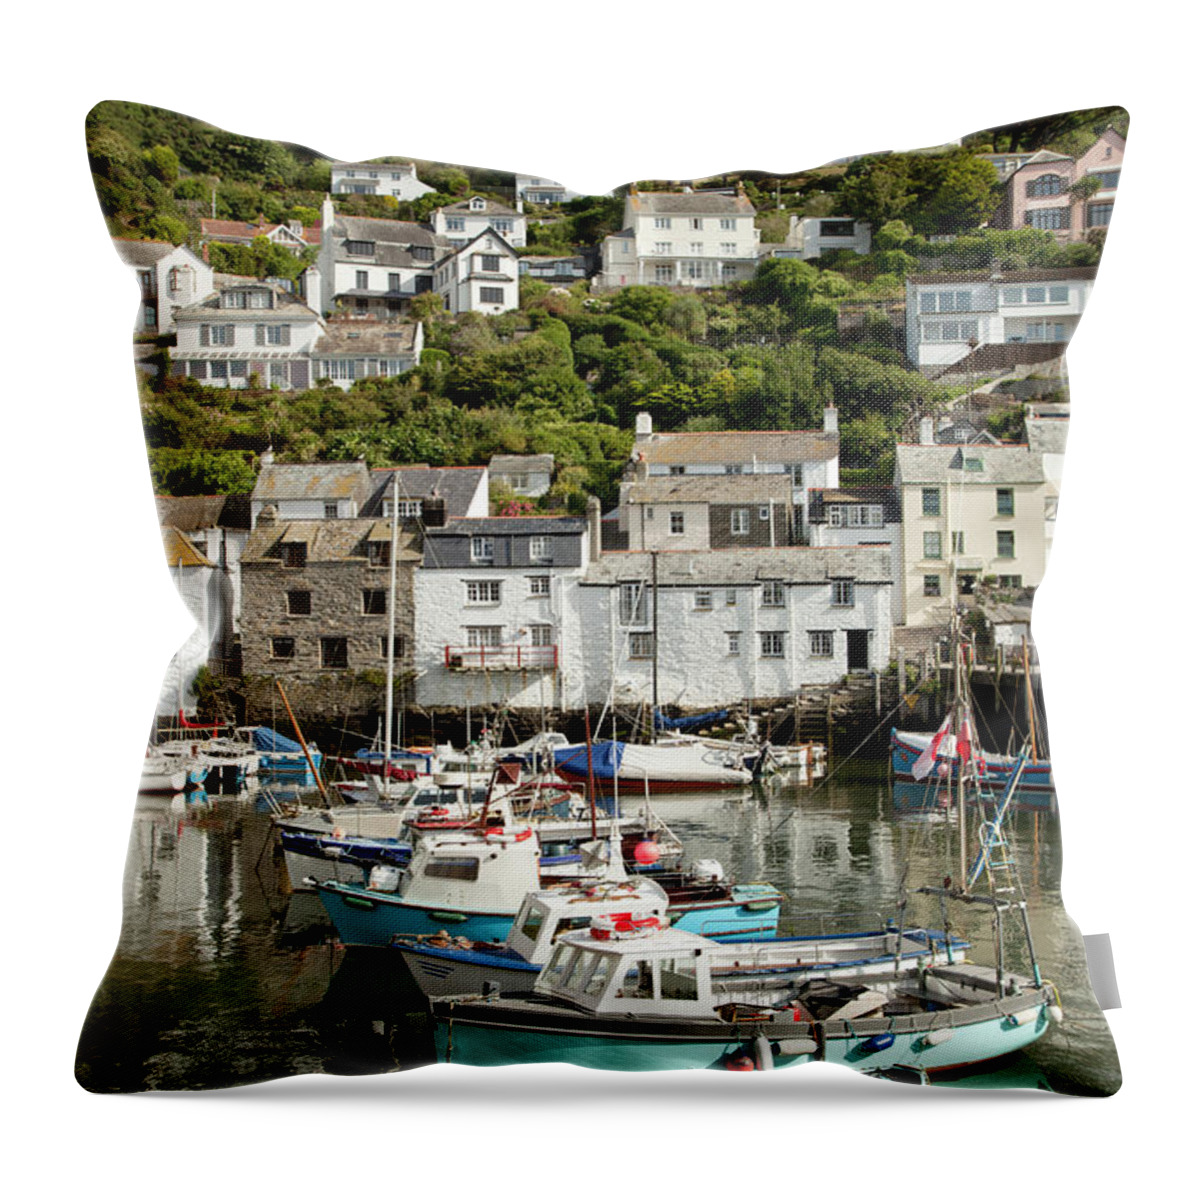 Southwest England Throw Pillow featuring the photograph Polperro Harbour, Cornwall by Paulaconnelly